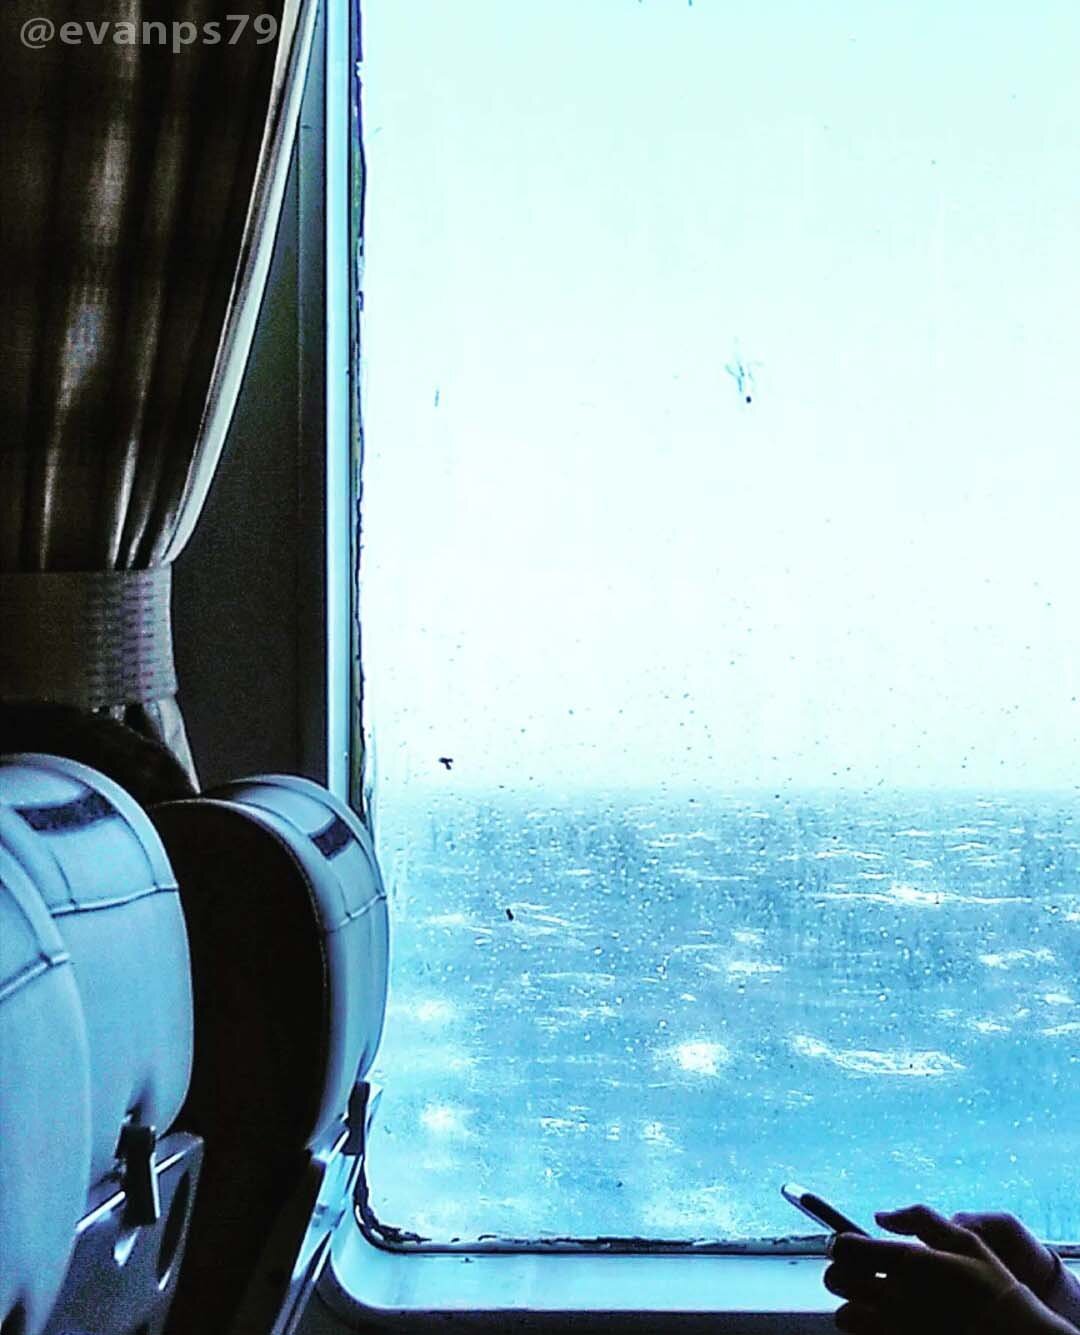 A person using his phone near the ship's porthole showing the rainy environment outside.